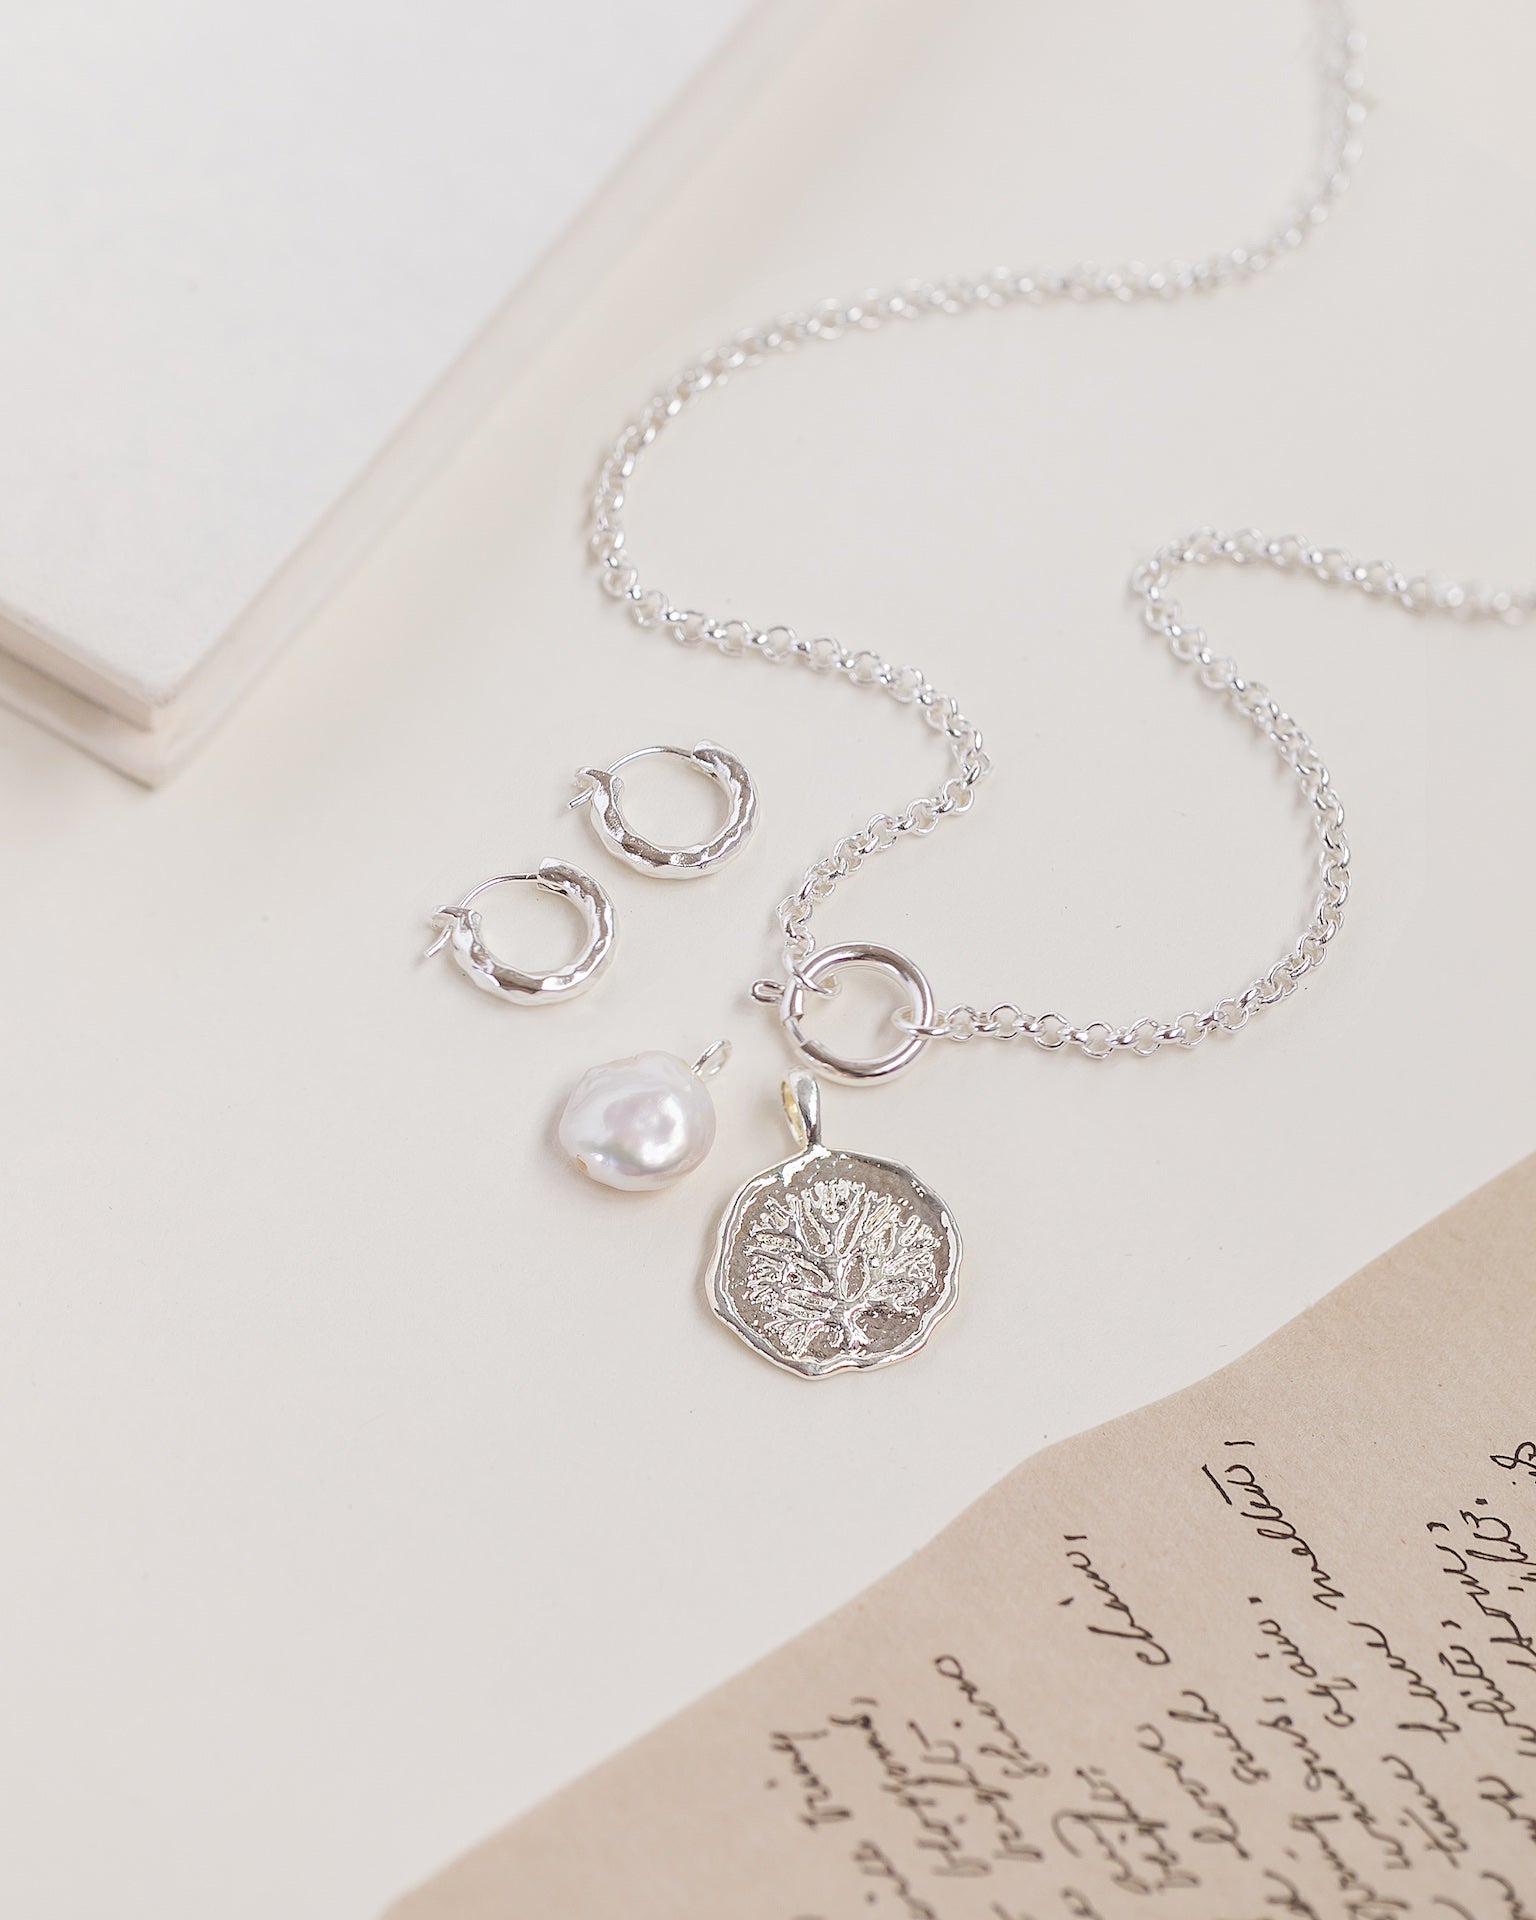 Heirloom Charming Necklace - Trades of Hope 